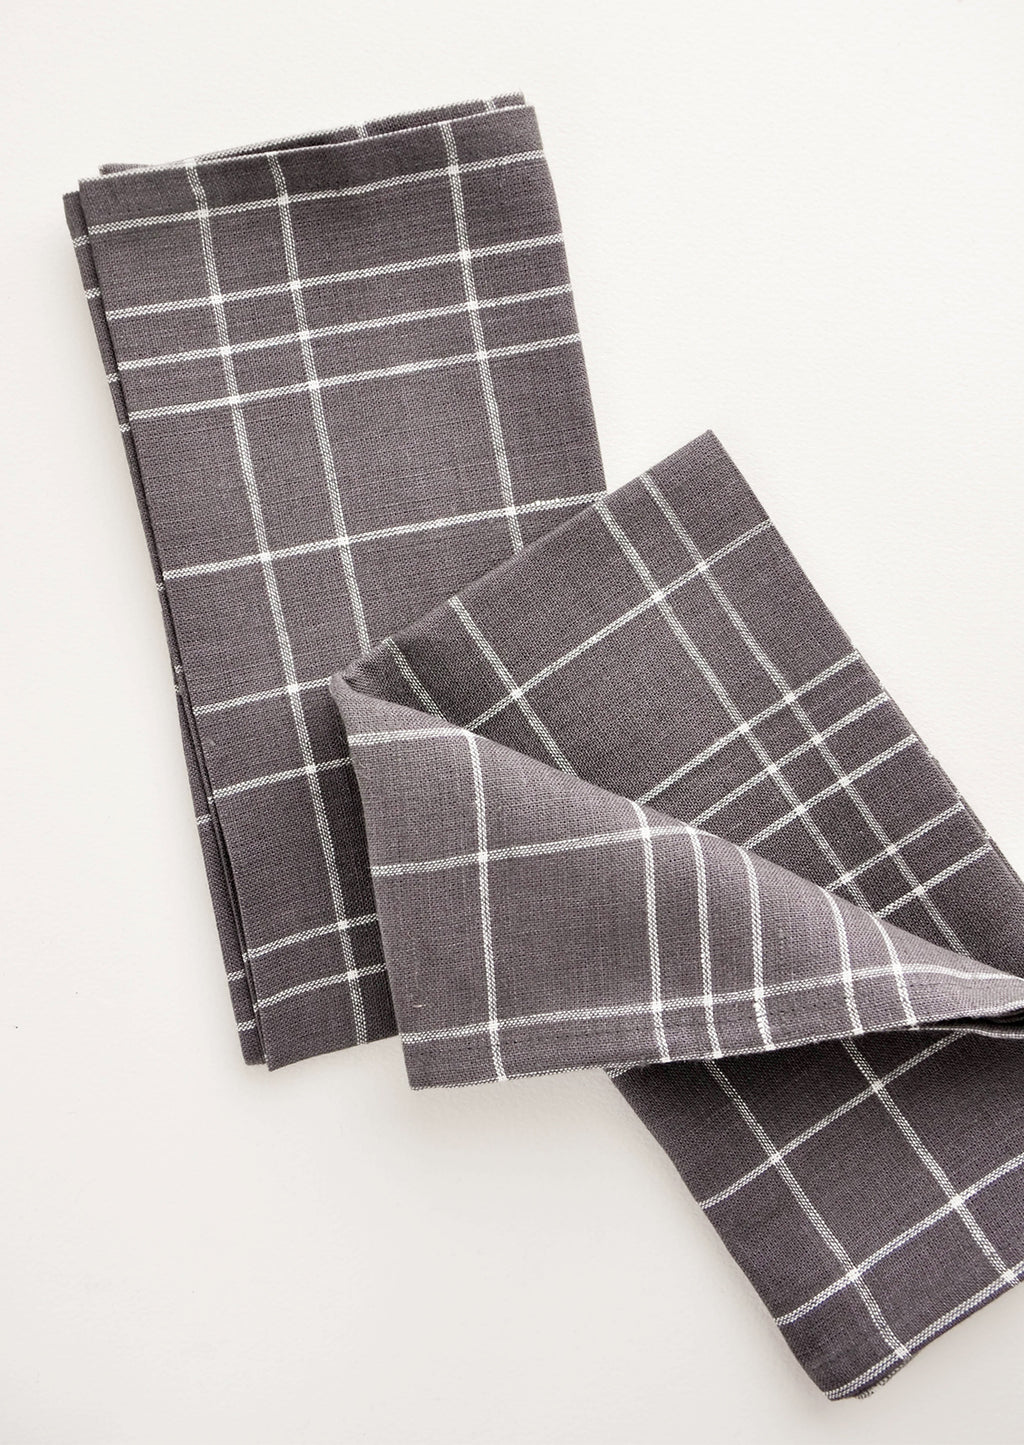 Charcoal Grid: Pair of fabric dinner napkins in grey and white grid pattern